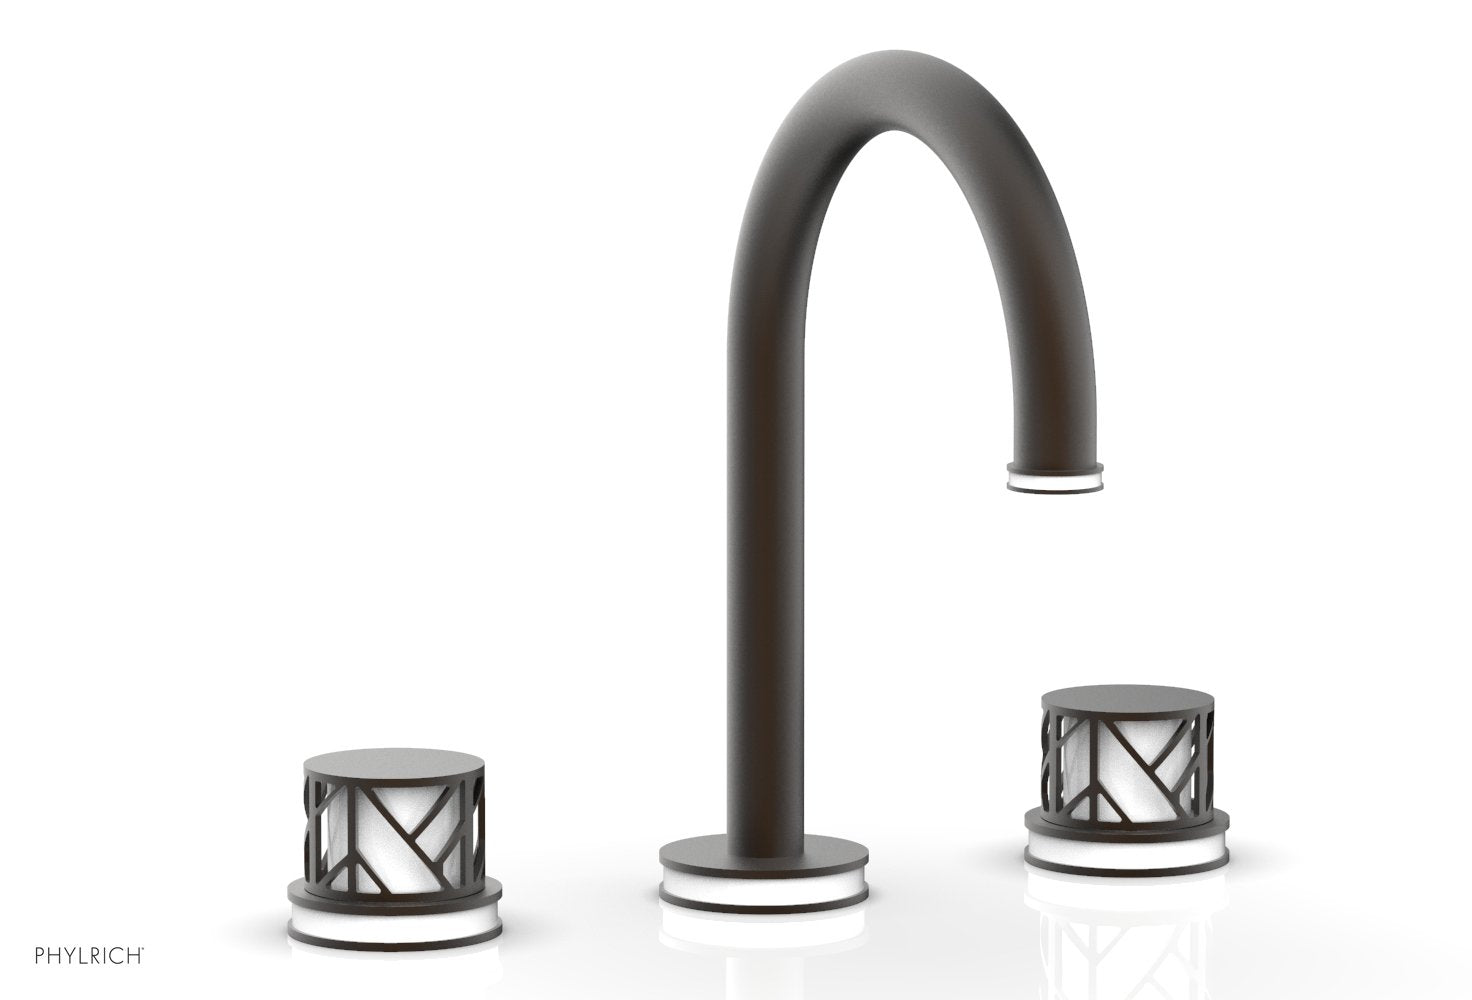 Phylrich JOLIE Widespread Faucet - Round Handles with "White" Accents